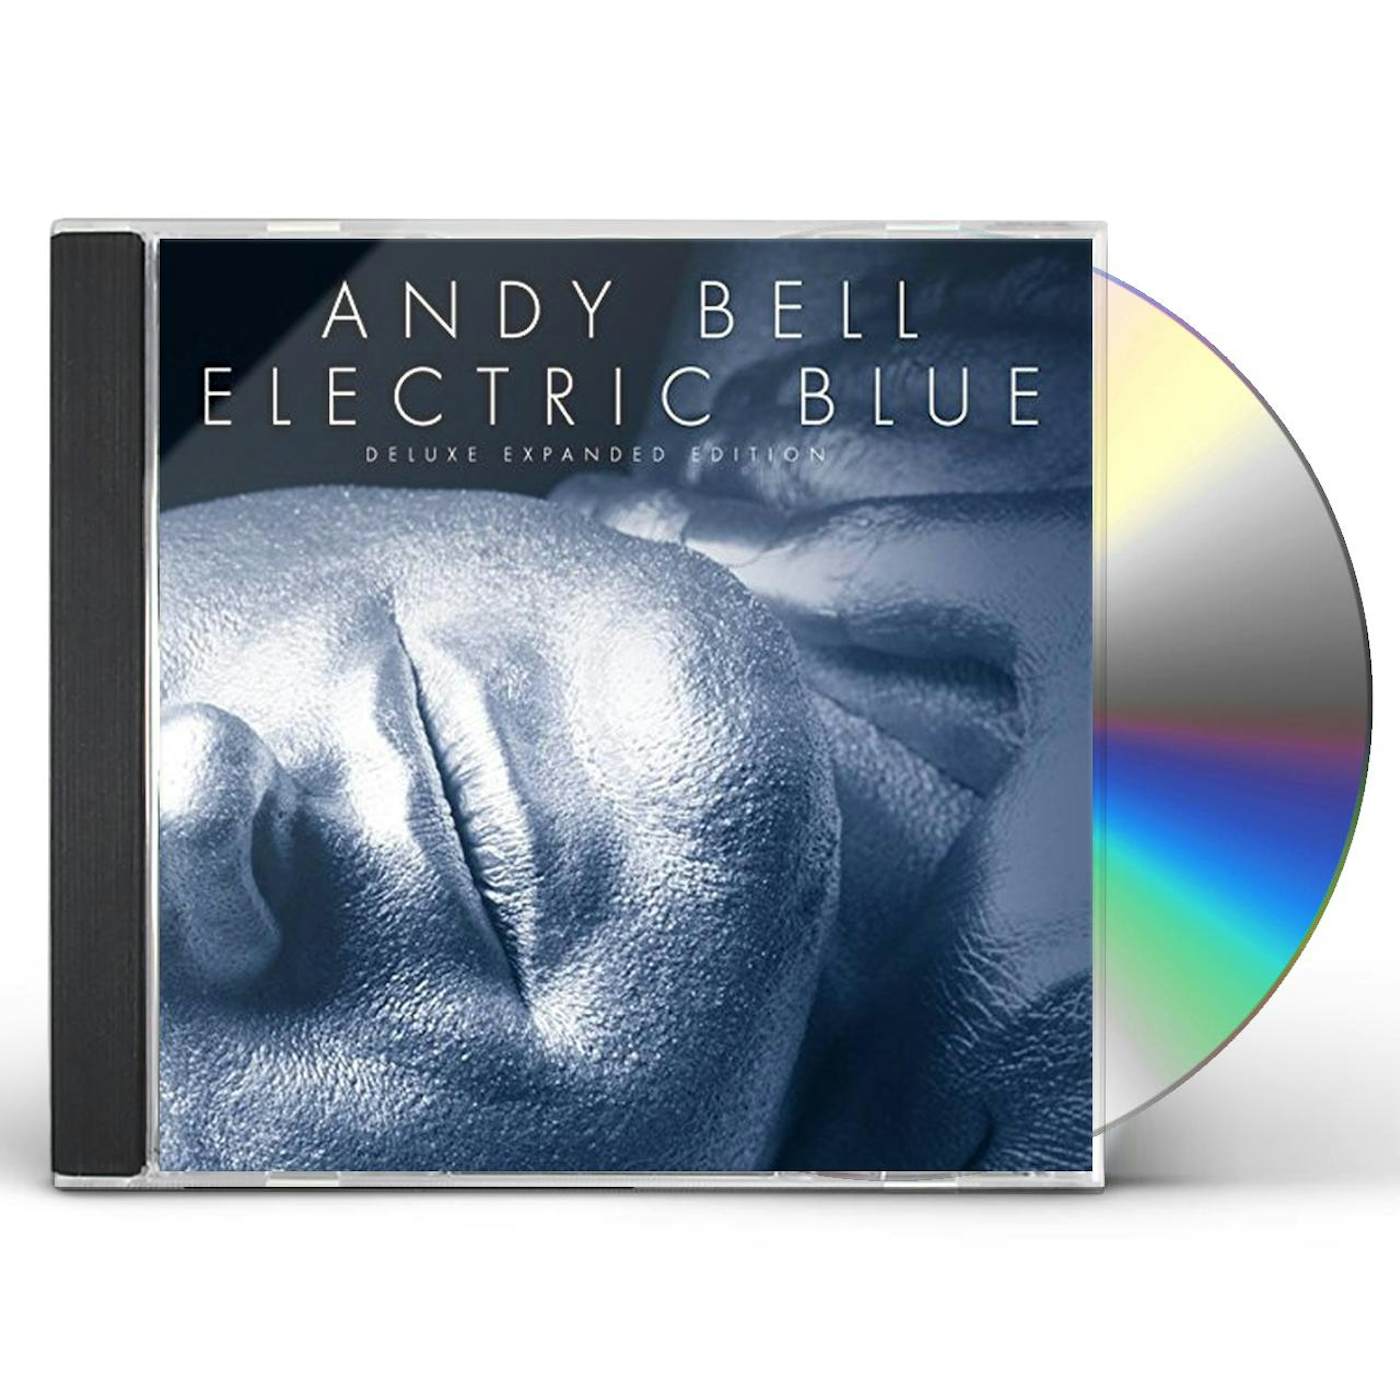 Andy Bell ELECTRIC BLUE: DELUXE EXPANDED EDITION CD